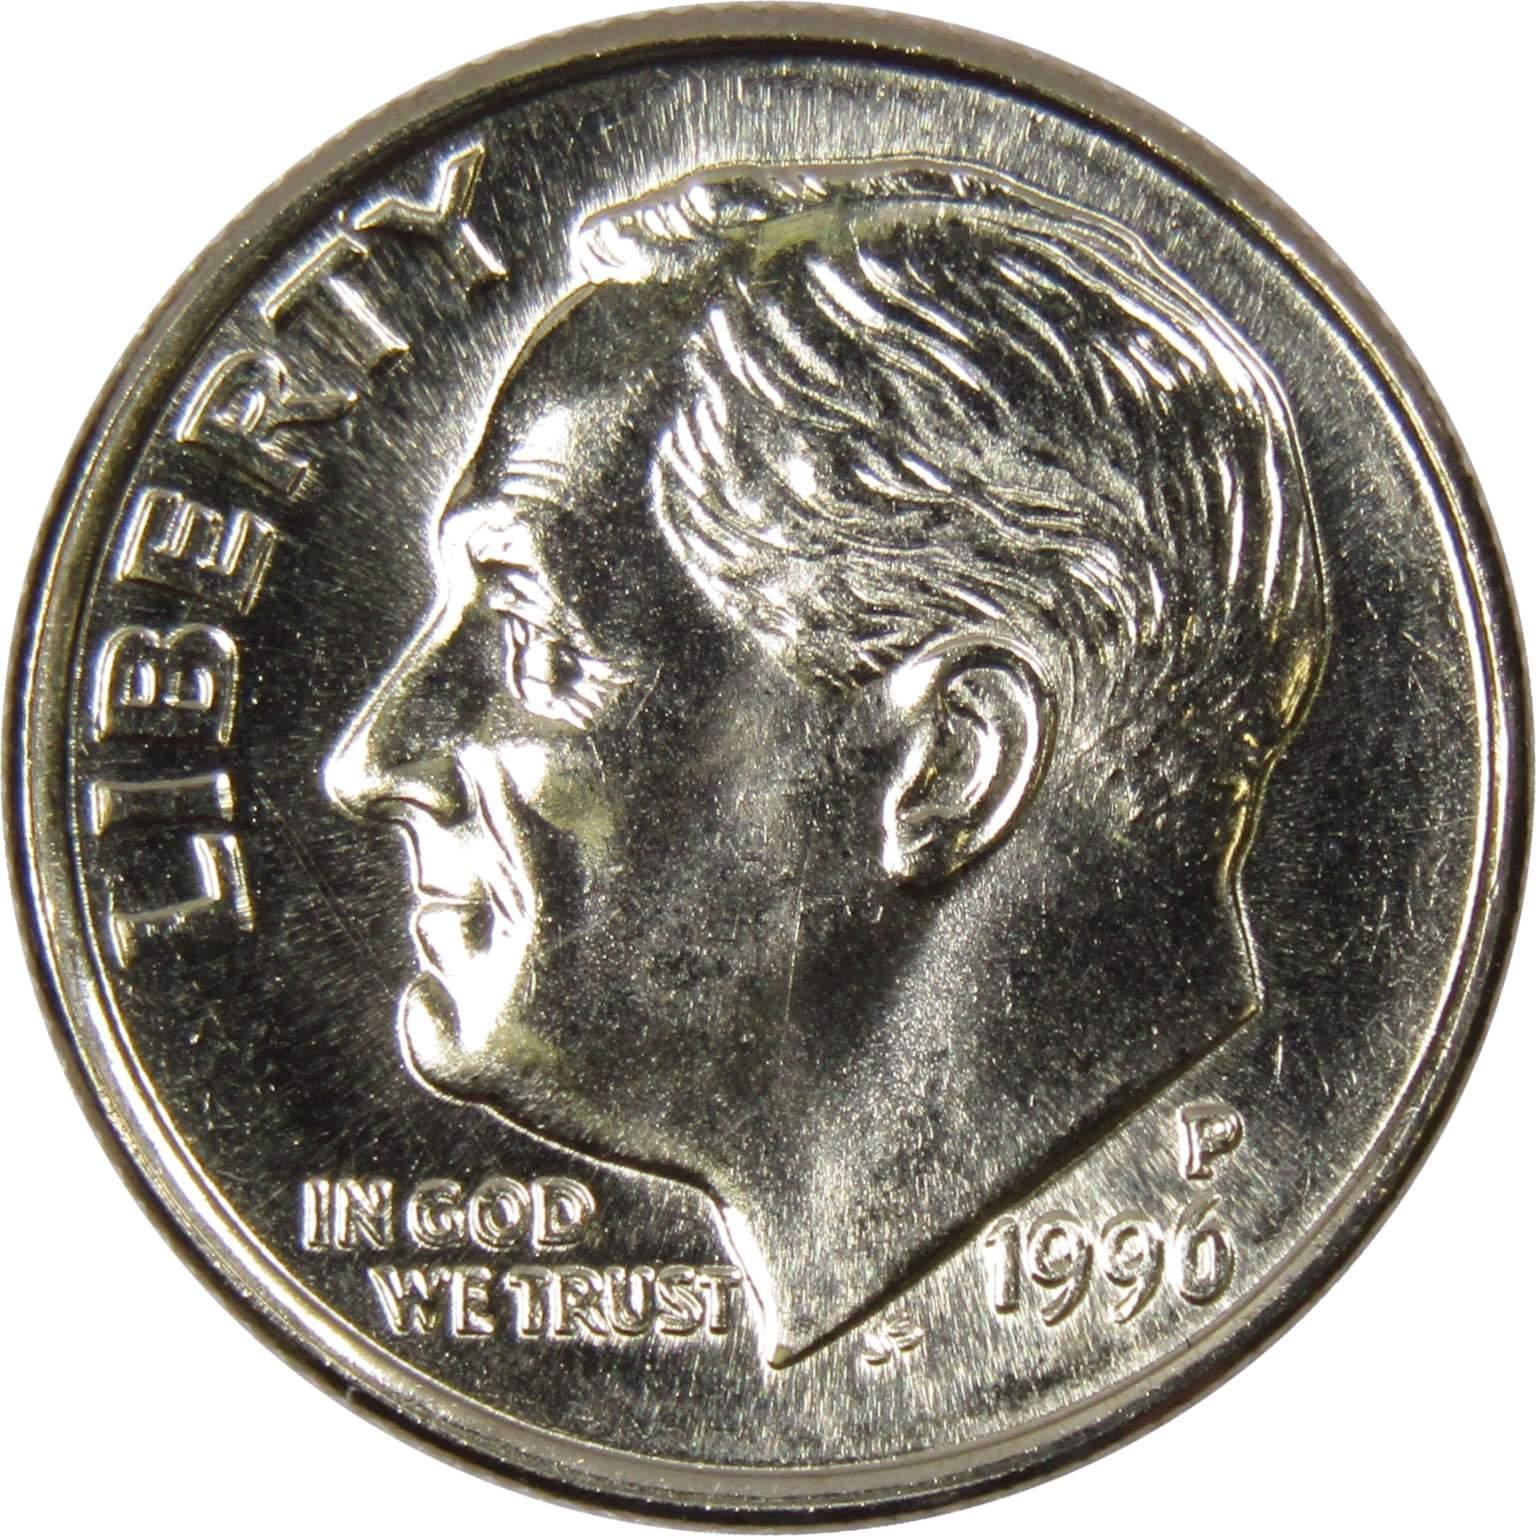 1996 P Roosevelt Dime BU Uncirculated Mint State 10c US Coin Collectible